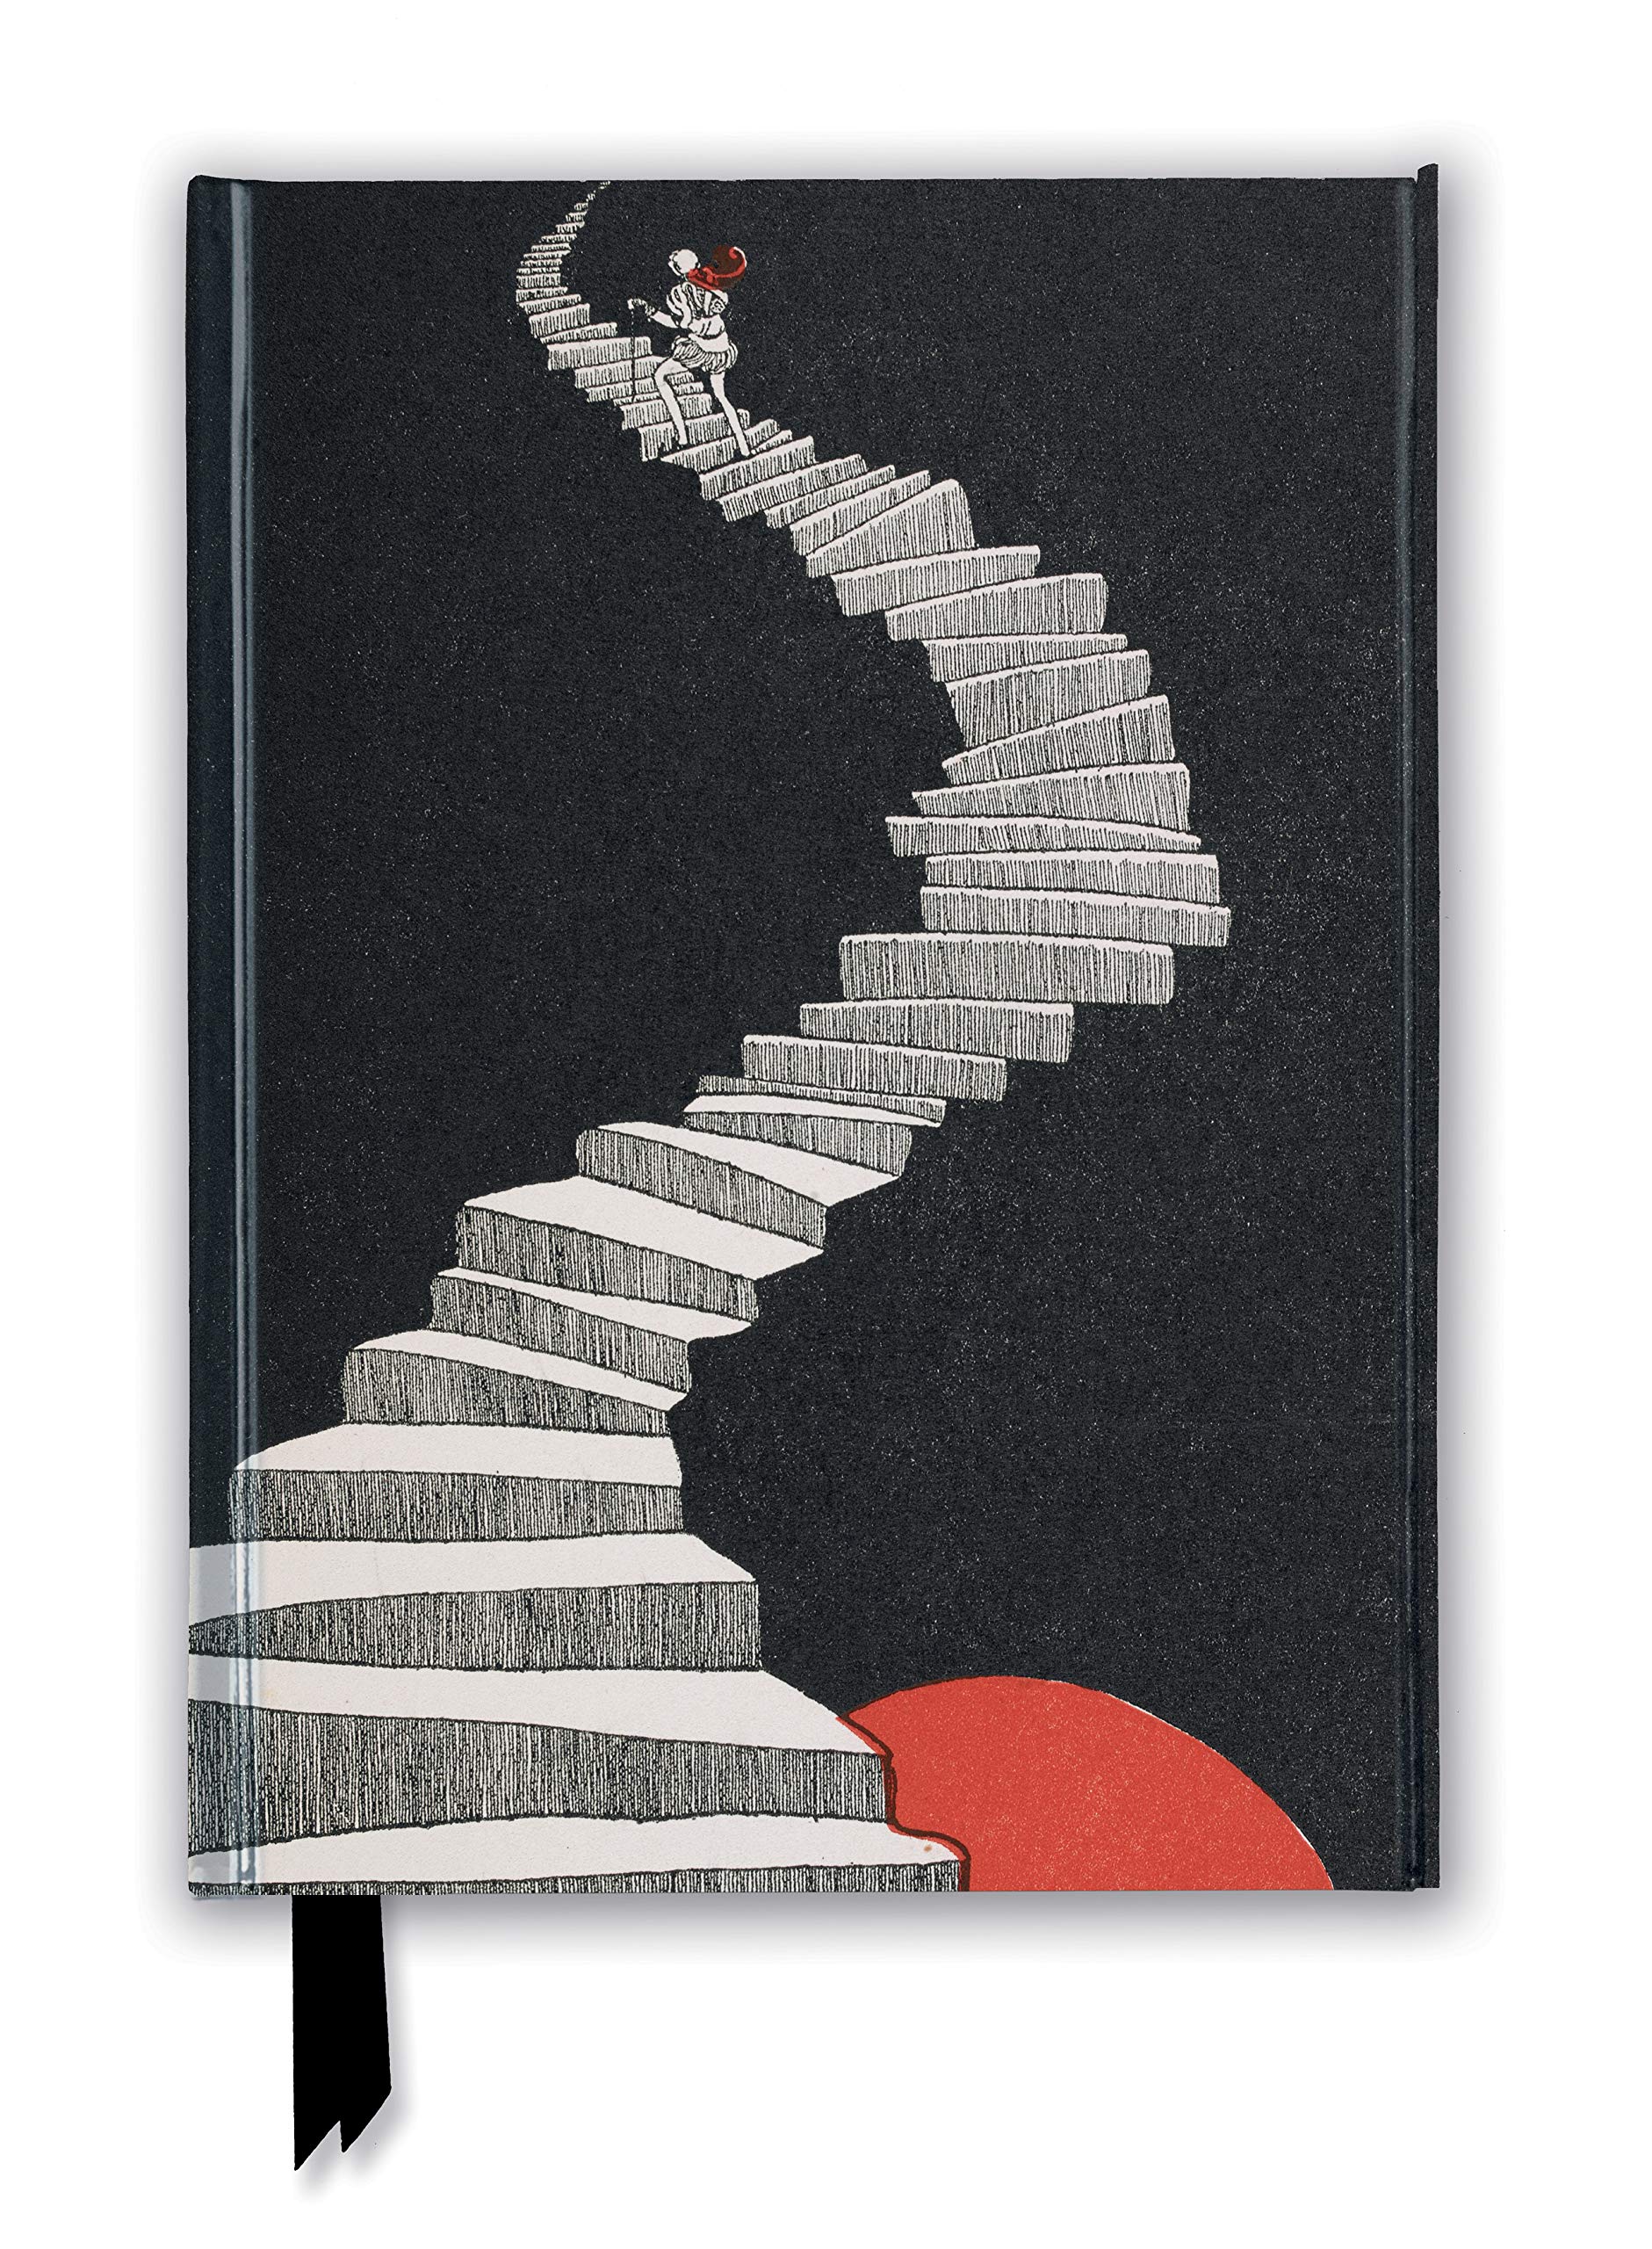 Jurnal - Hans Christian Andersen - A Figure Walking up a Staircase | Flame Tree Publishing